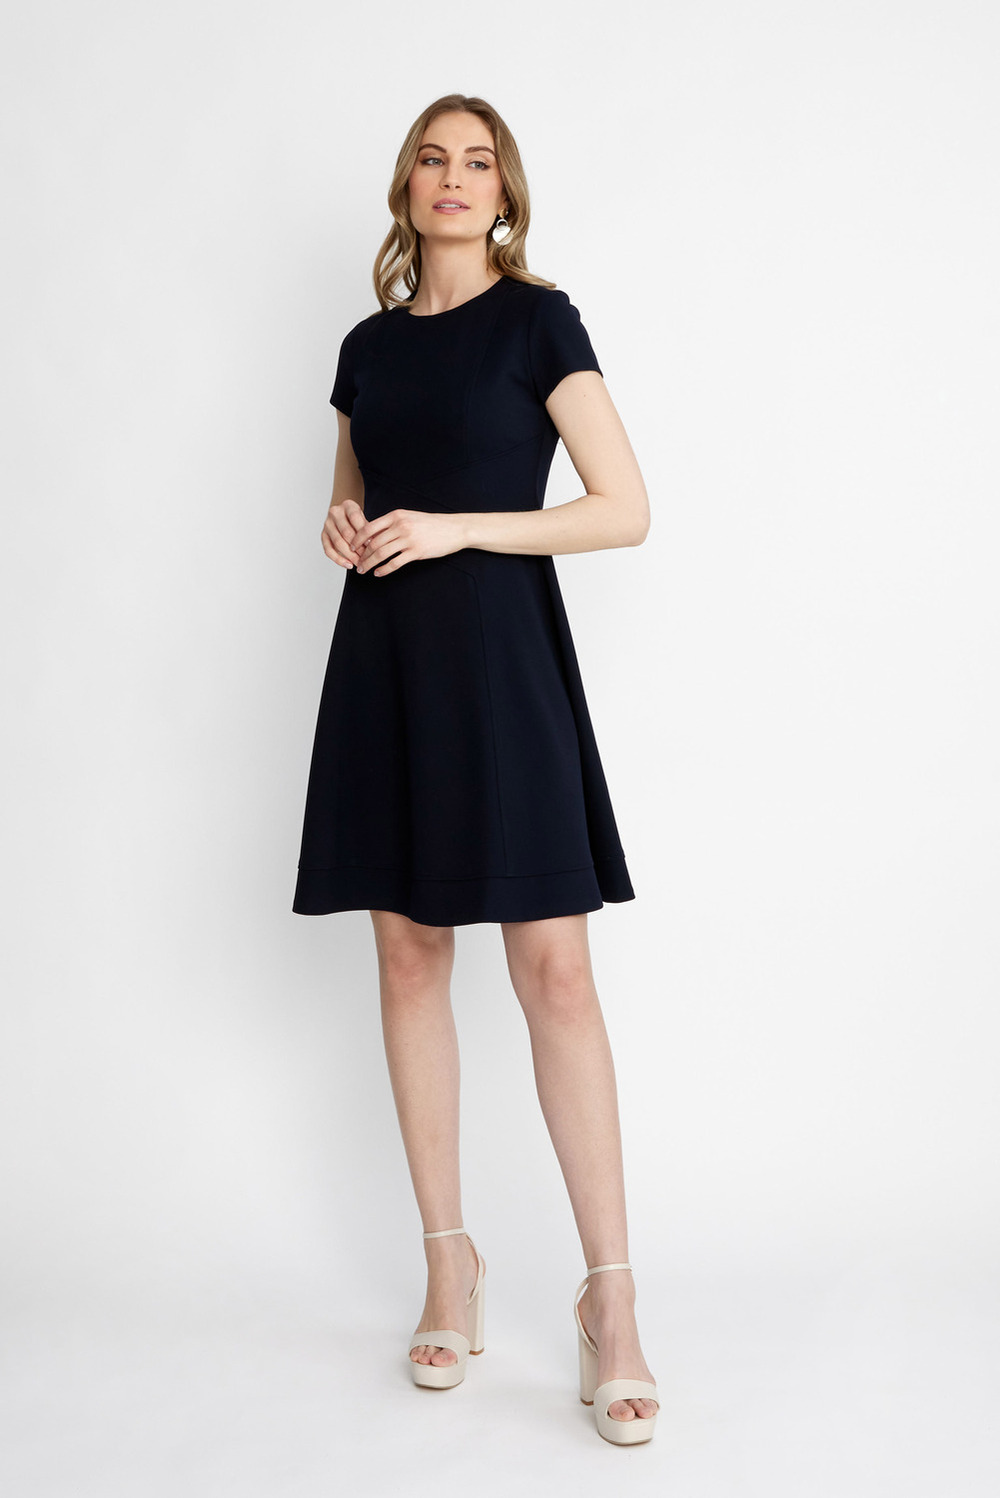 Short Sleeve Fit & Flare Dress Style 232106. Midnight Blue